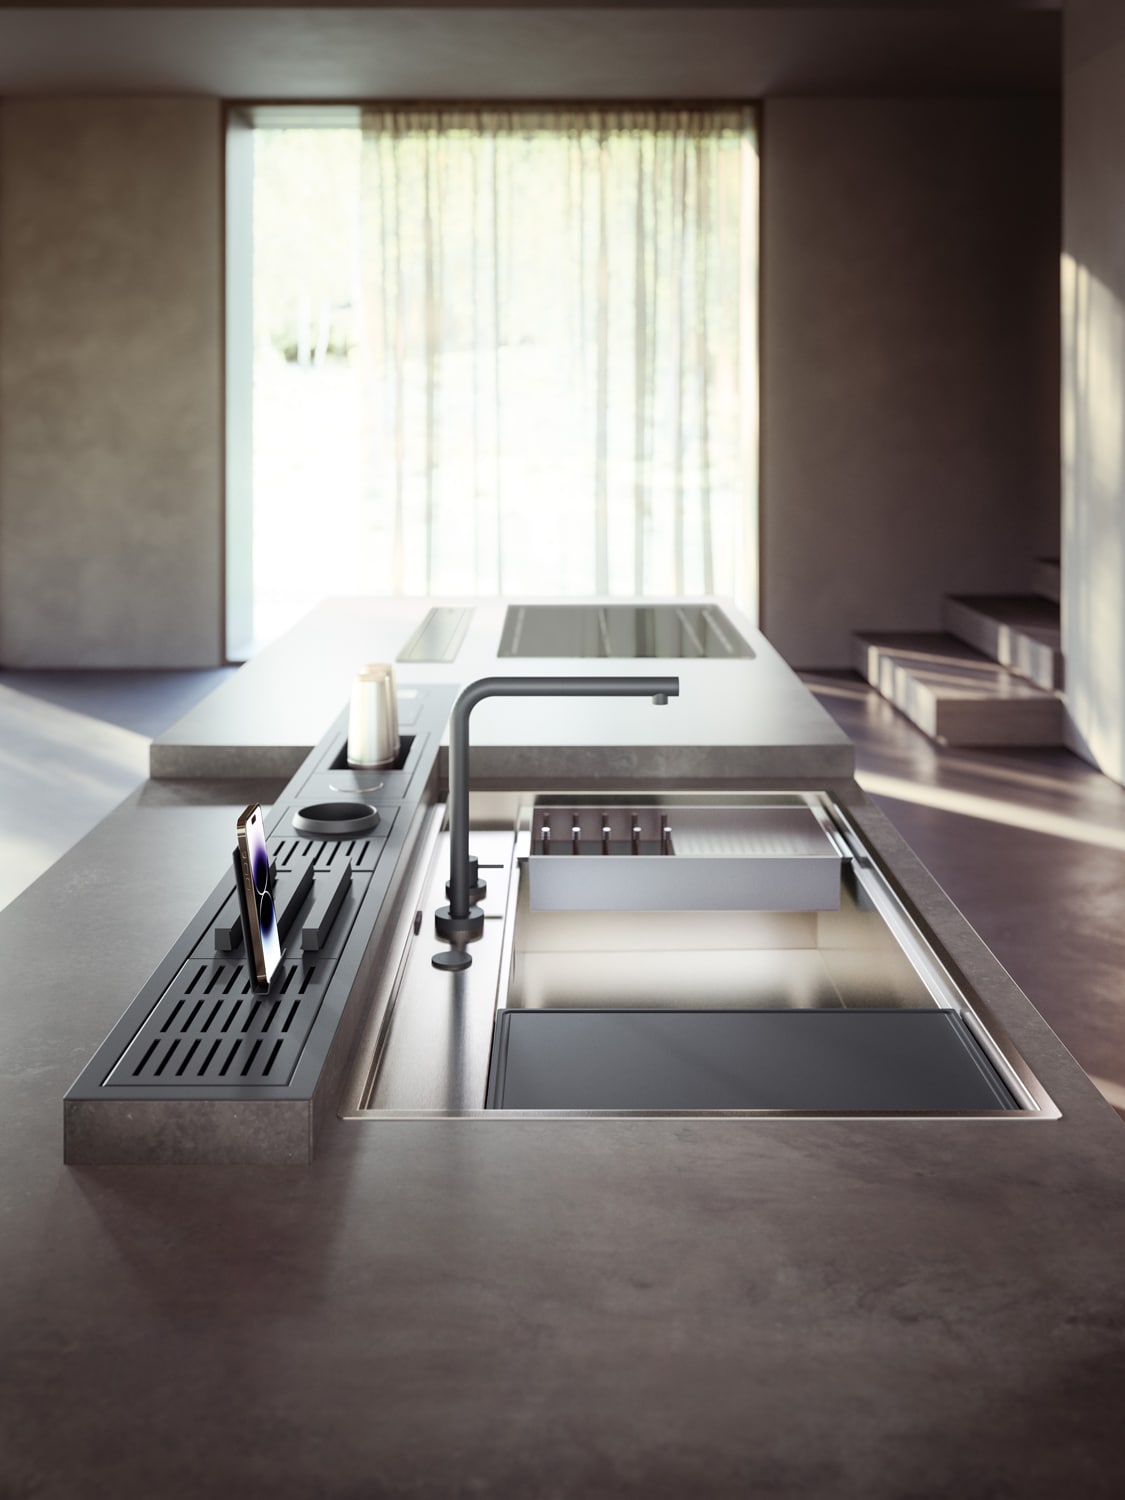 Integrated within the island countertop is an accessorized channel with a scale, holders for dishes, knives, glassware, phones and more.